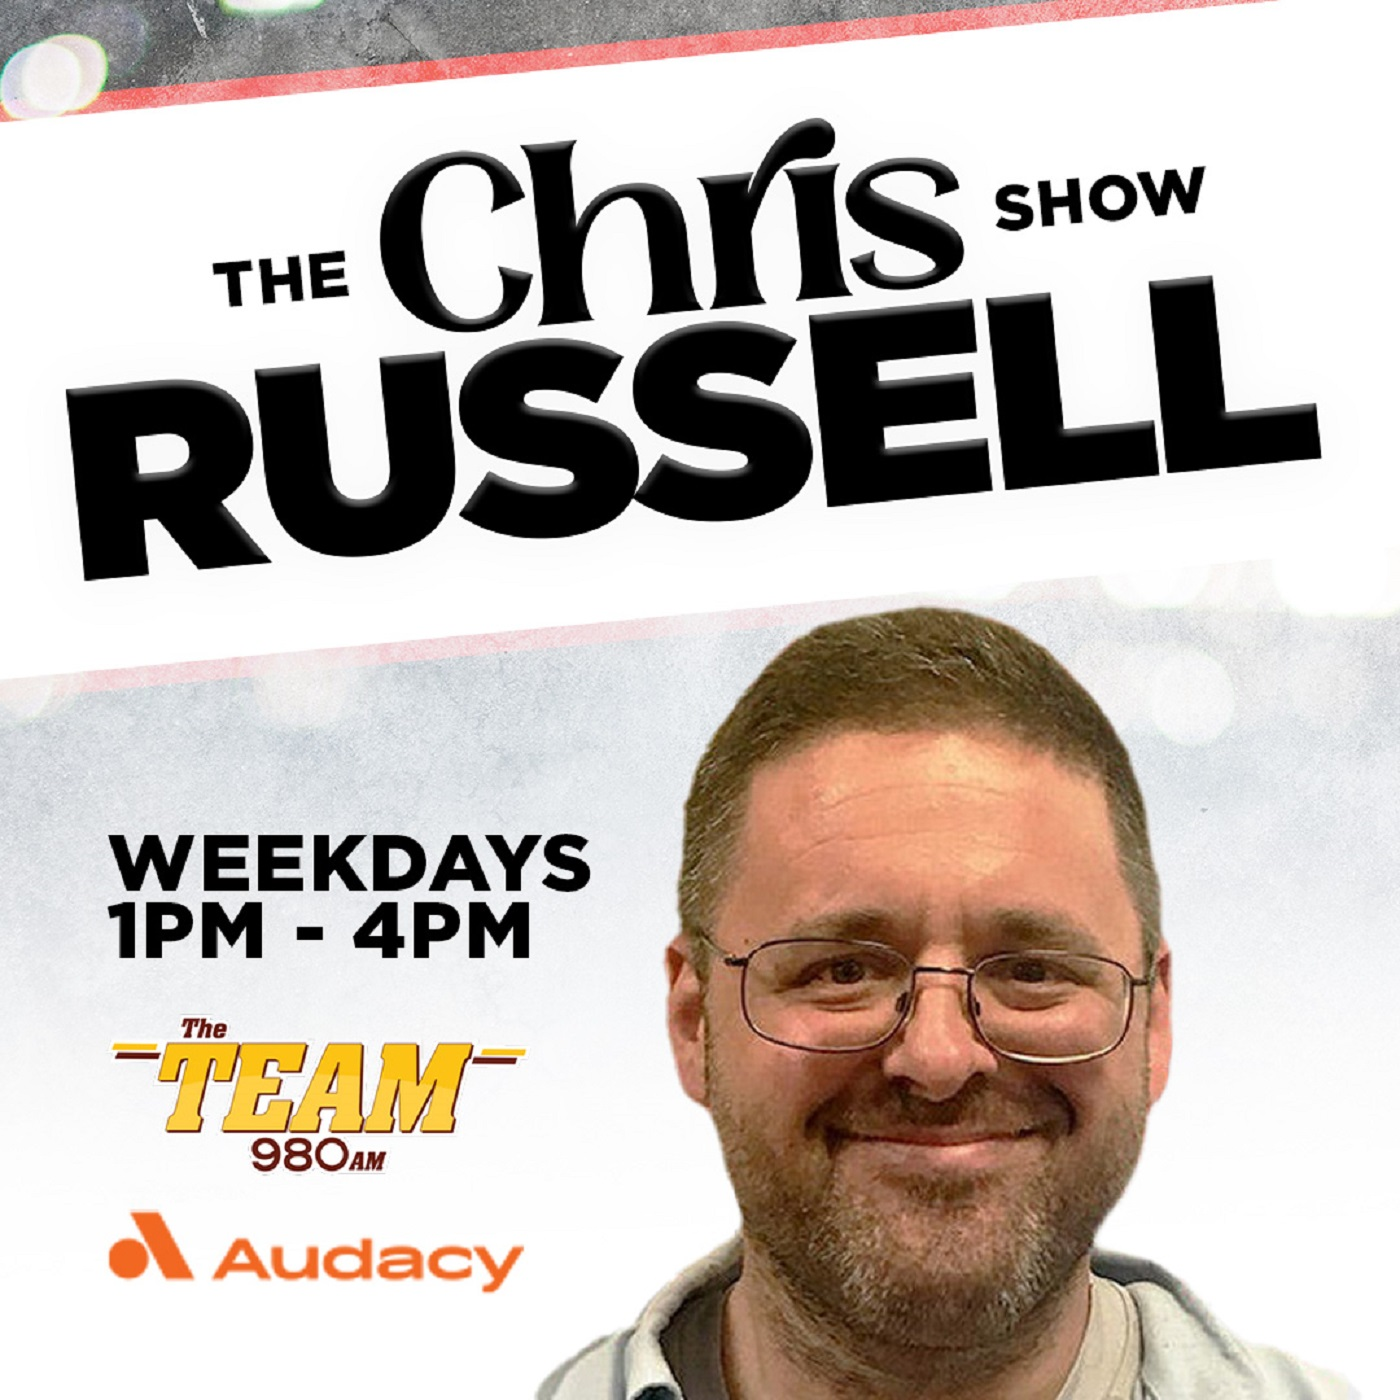 Michael Phillips Joins Russell on the Radio